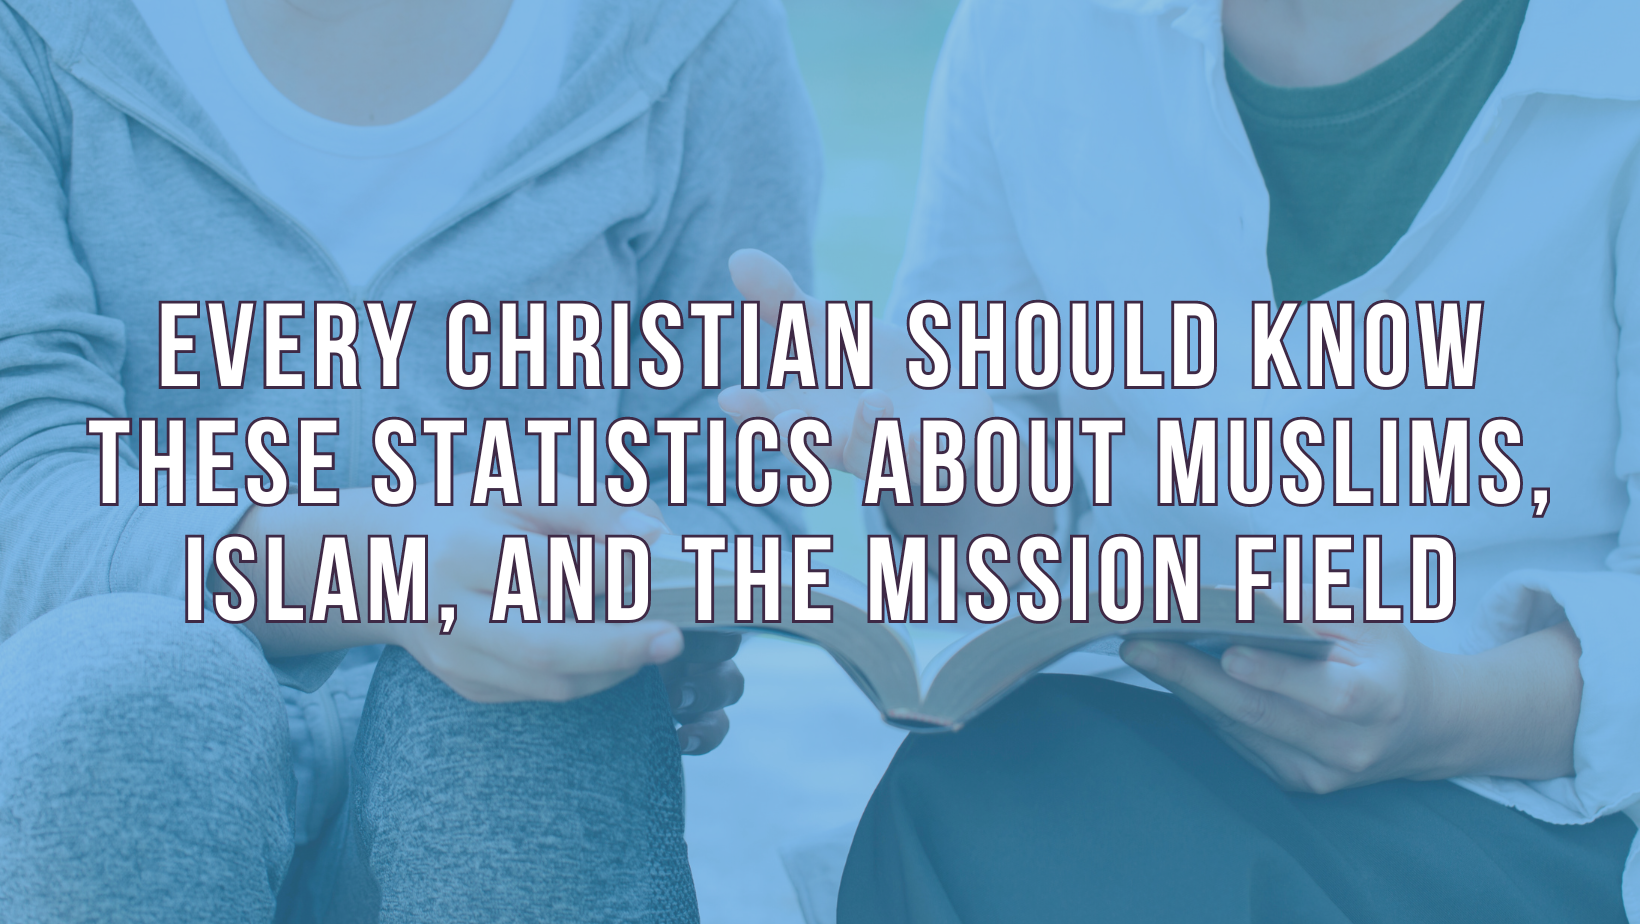 Statistics about reaching Muslims and the mission field